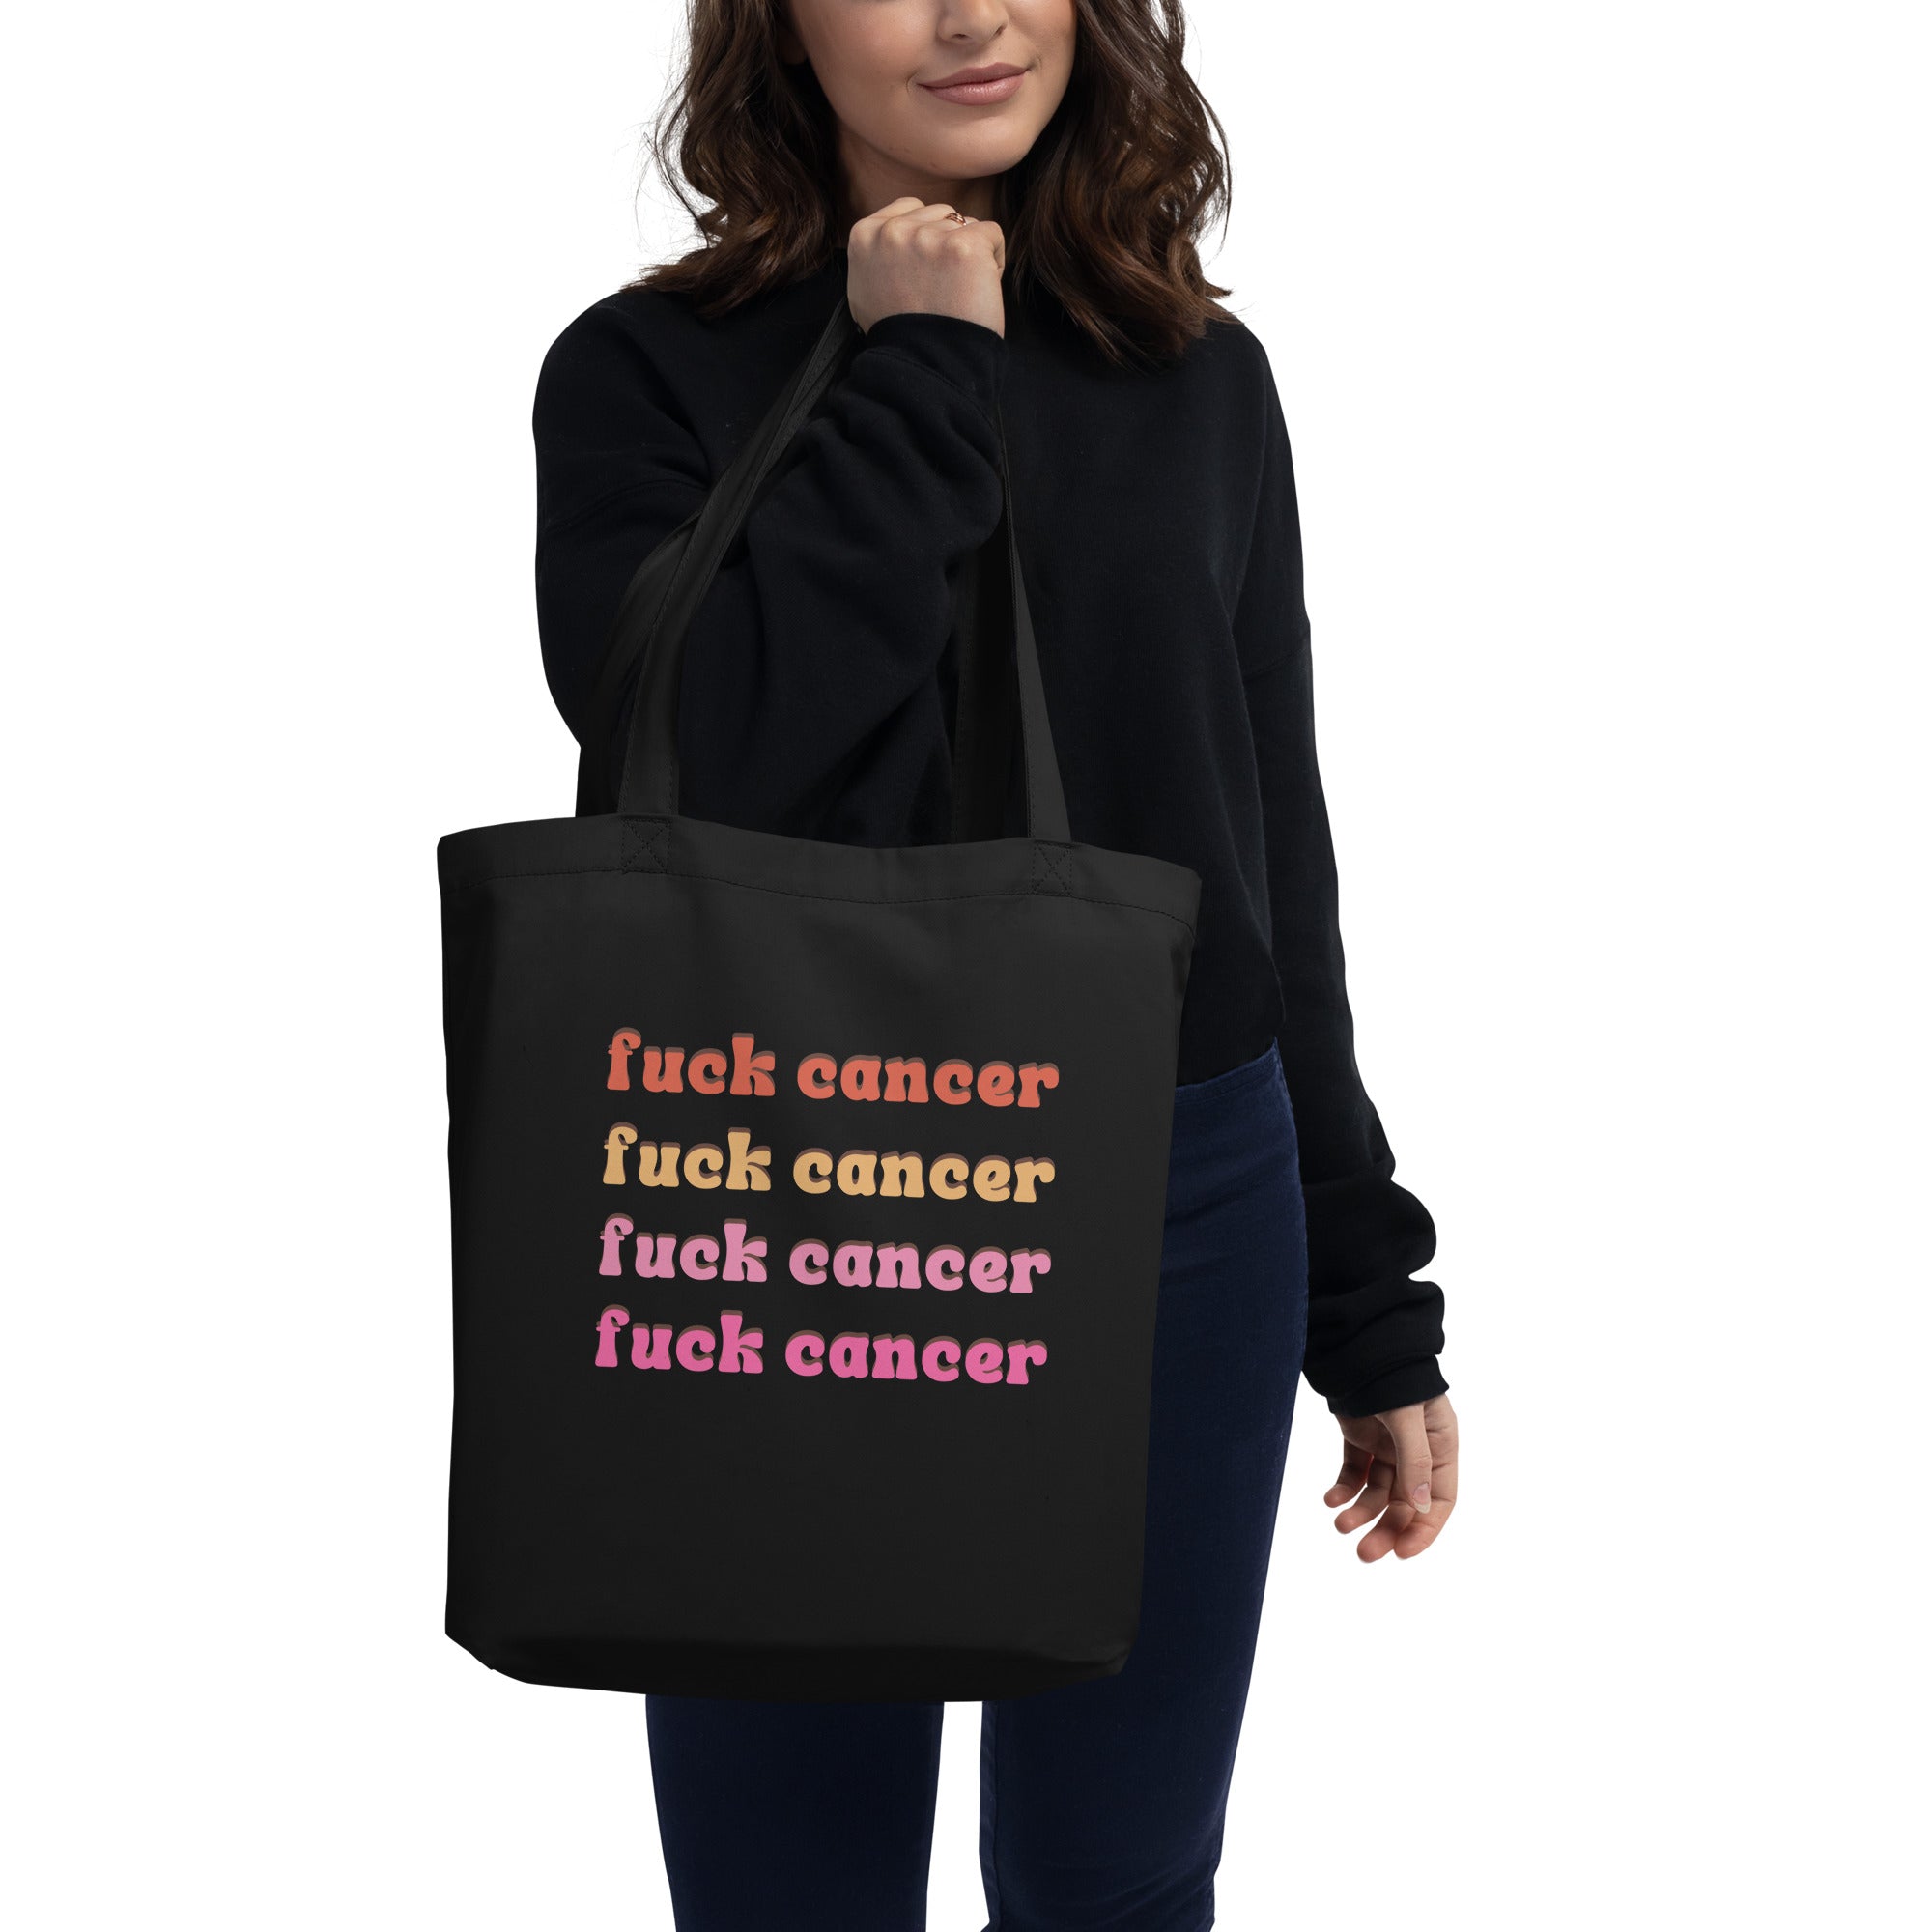 Chemo tote bag for Cancer Patient